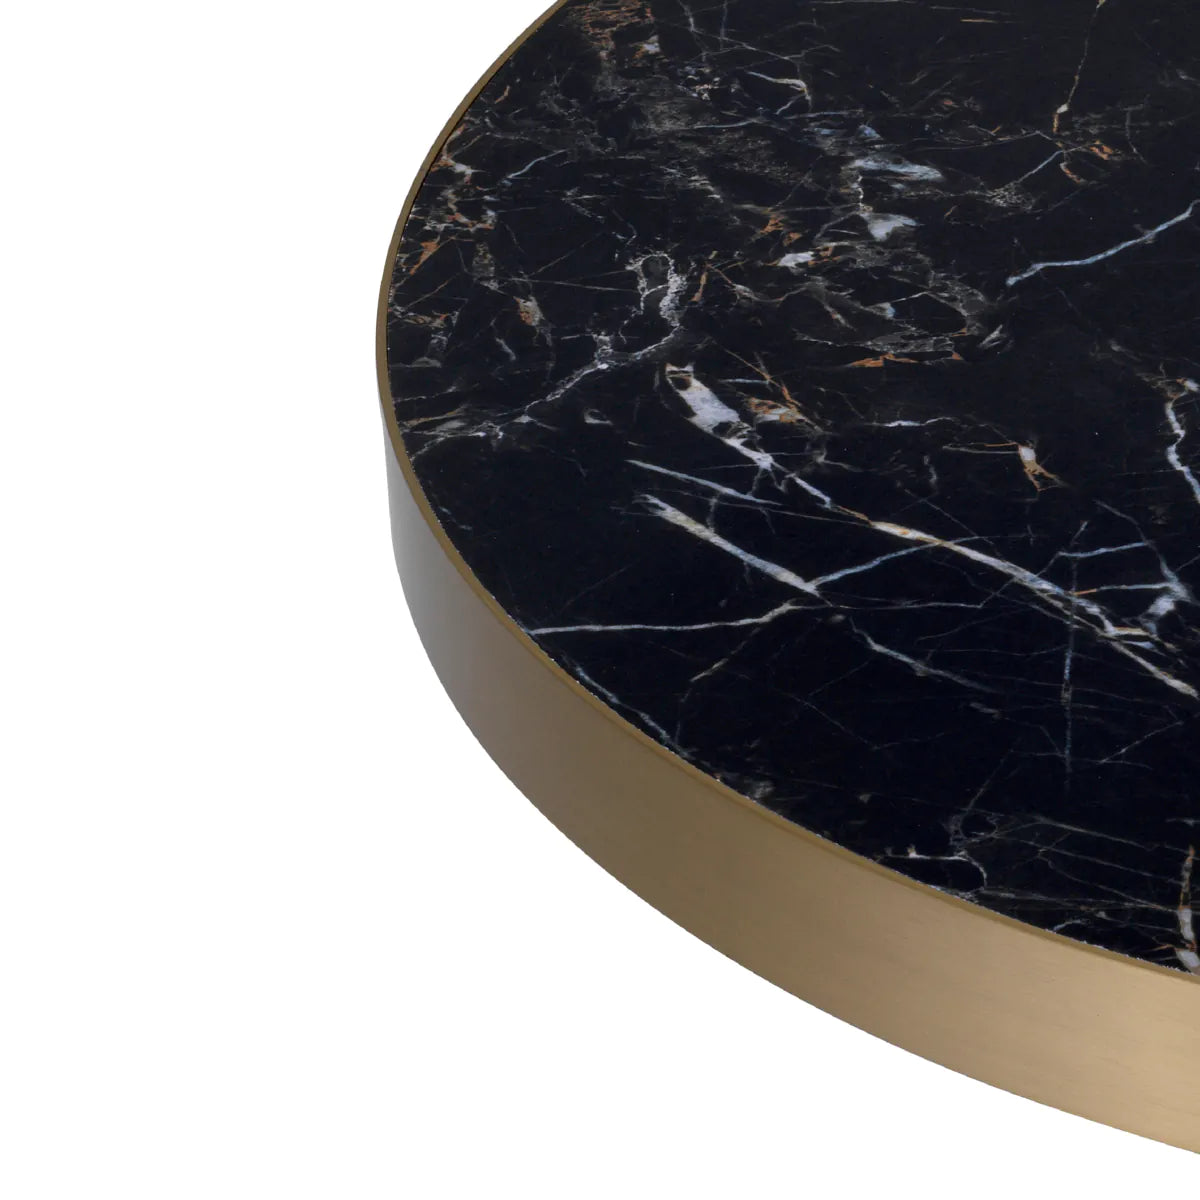 Excelsior Coffee Table - Marble